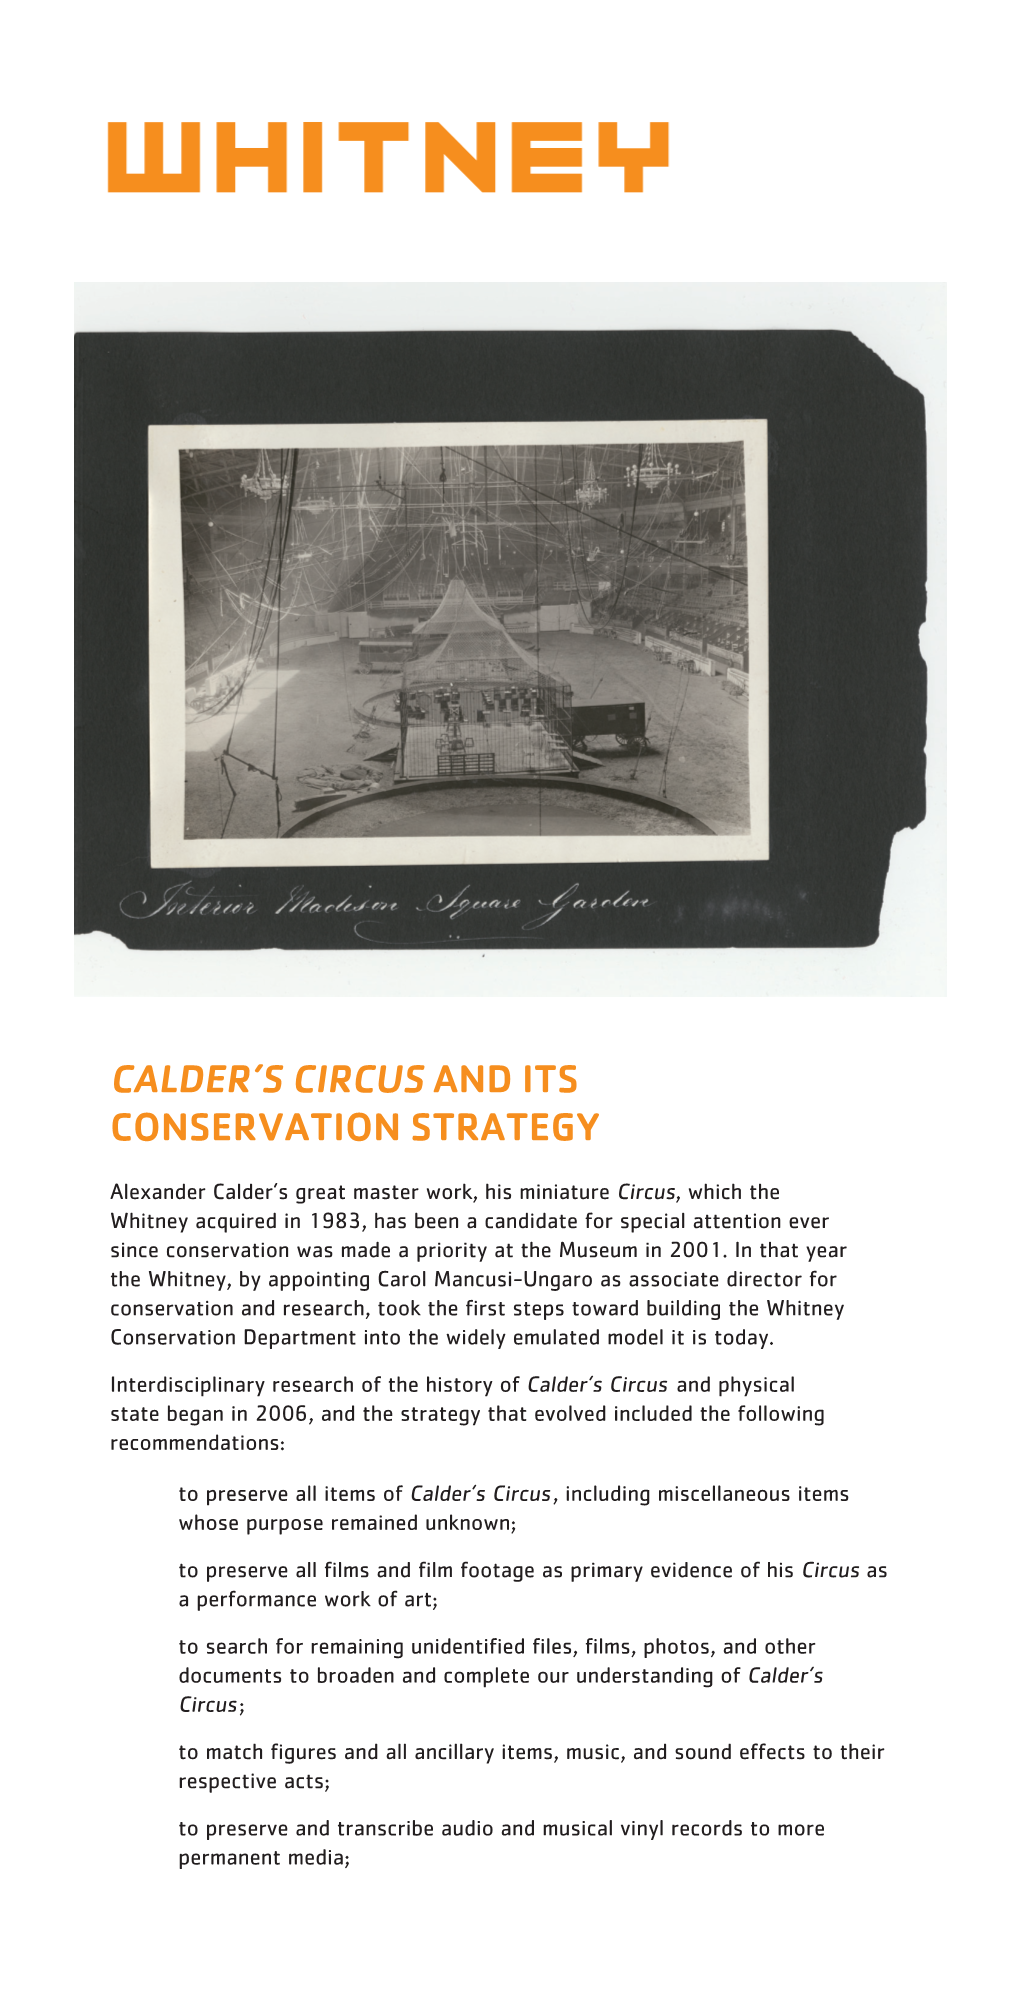 Calder's Circus and Its Conservation Strategy